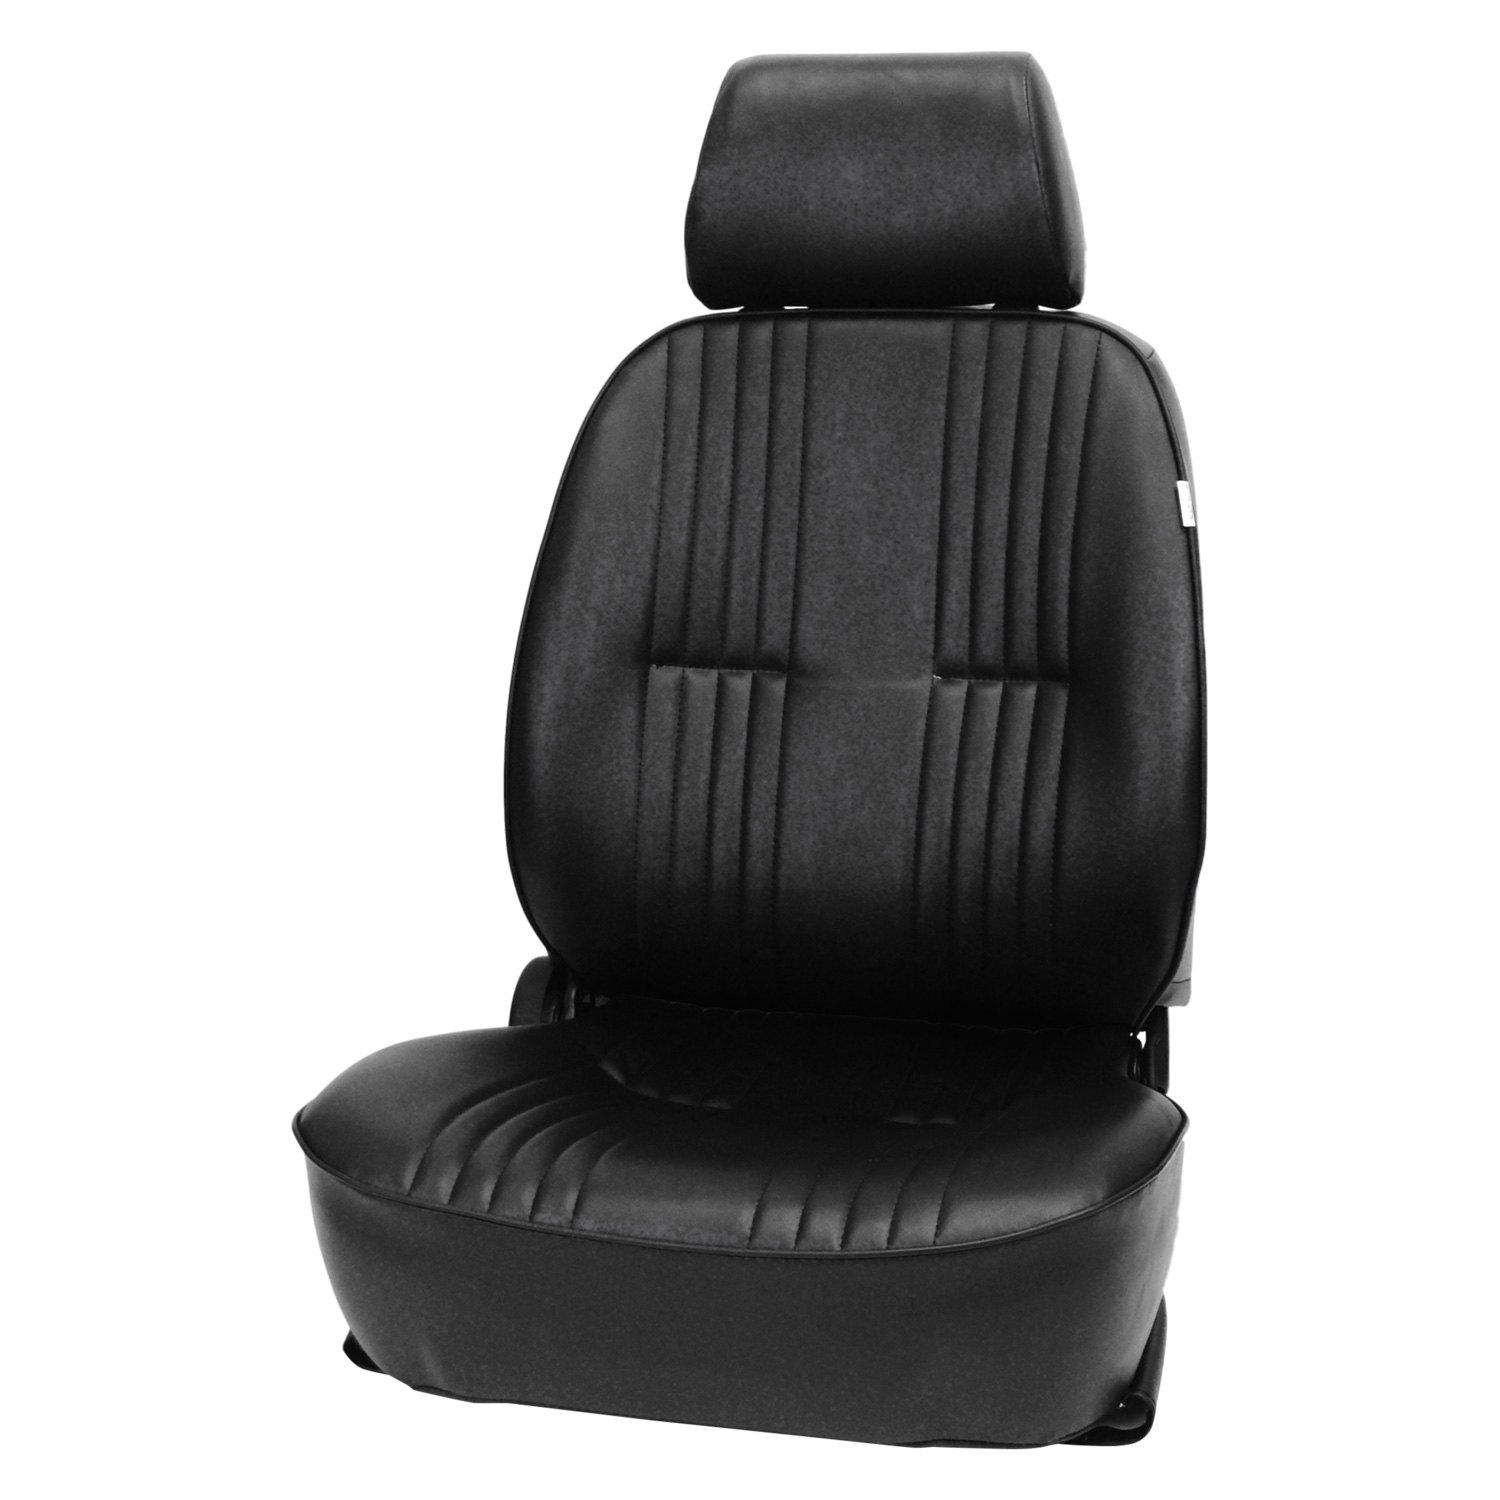 Procar Pro 90 Bucket Seat with Headrest, Right